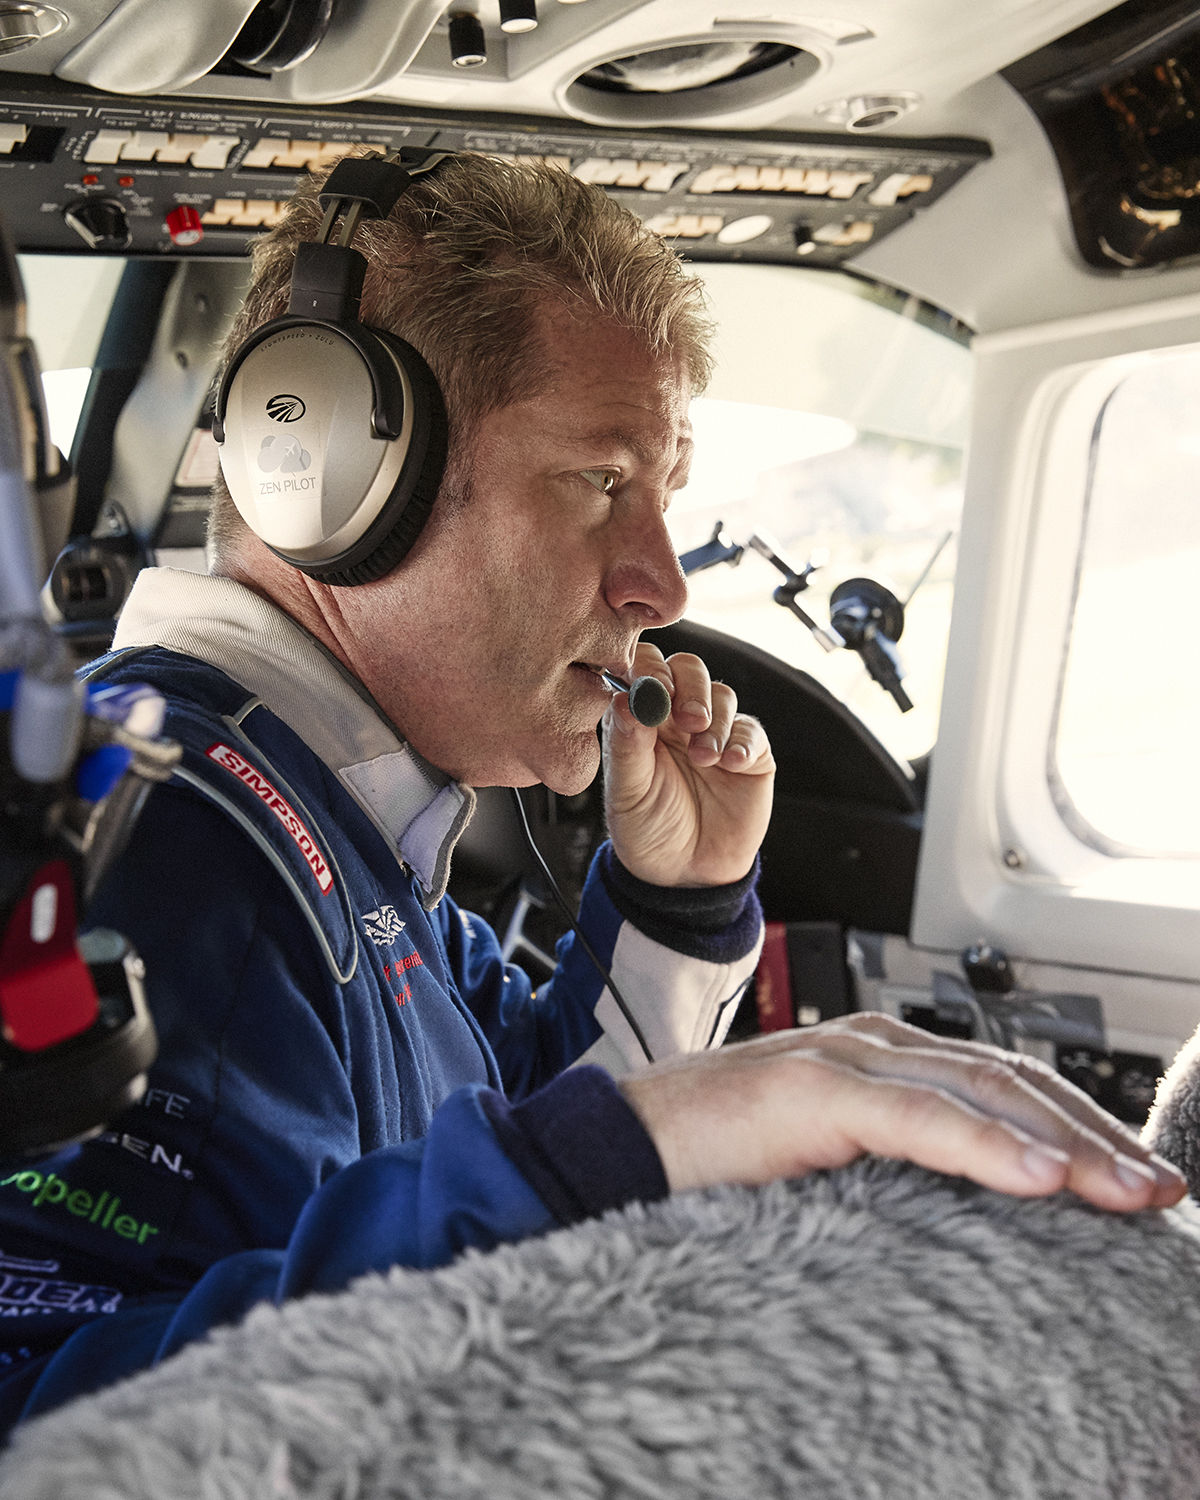 Pole to Pole Pilot – Robert in Plane